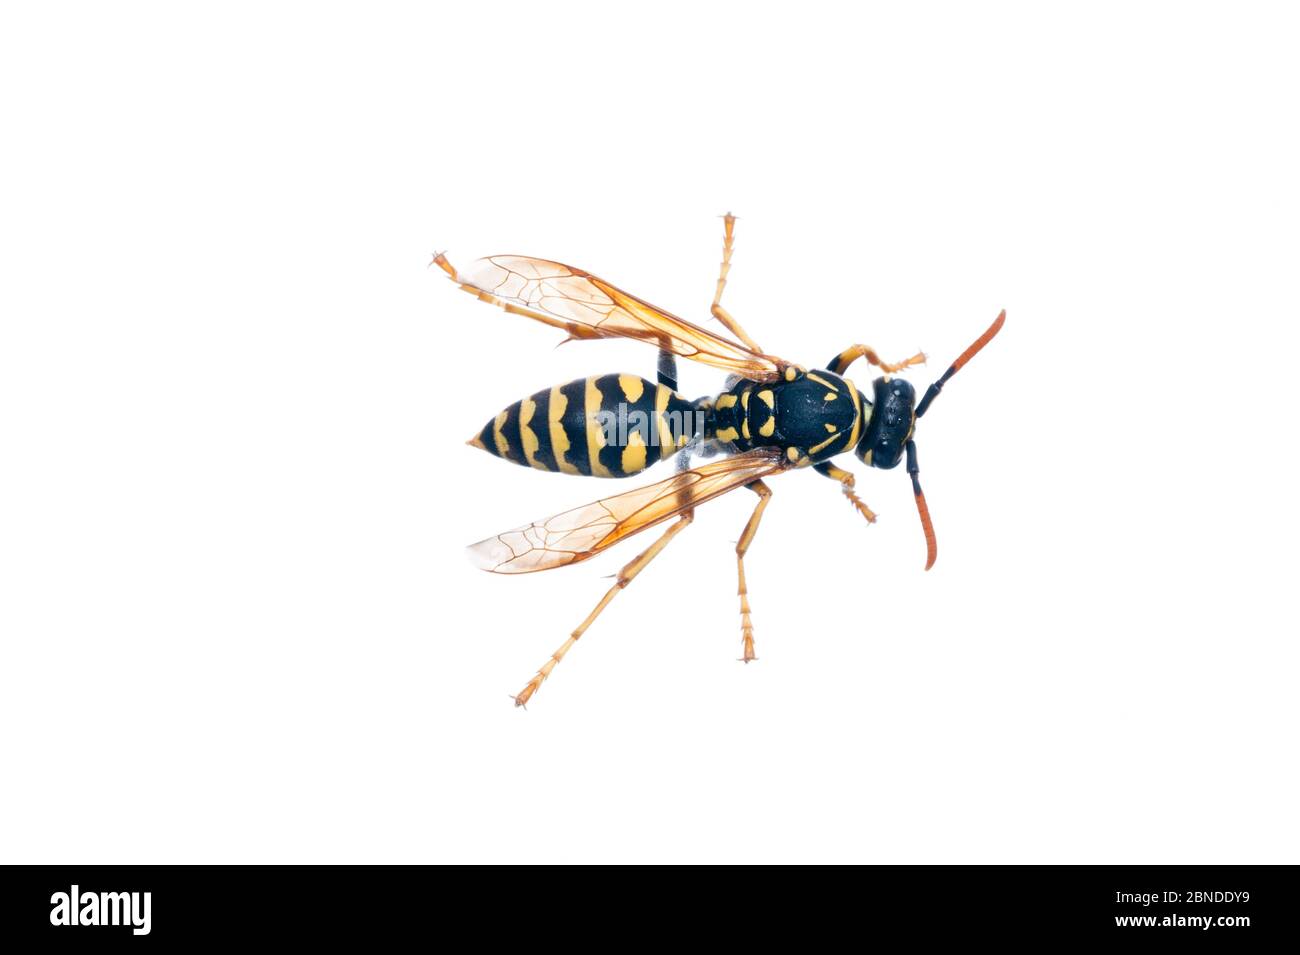 European aper wasp (Polistes dominulus) Burgundy, France, April. Meetyourneighbours.net project Stock Photo